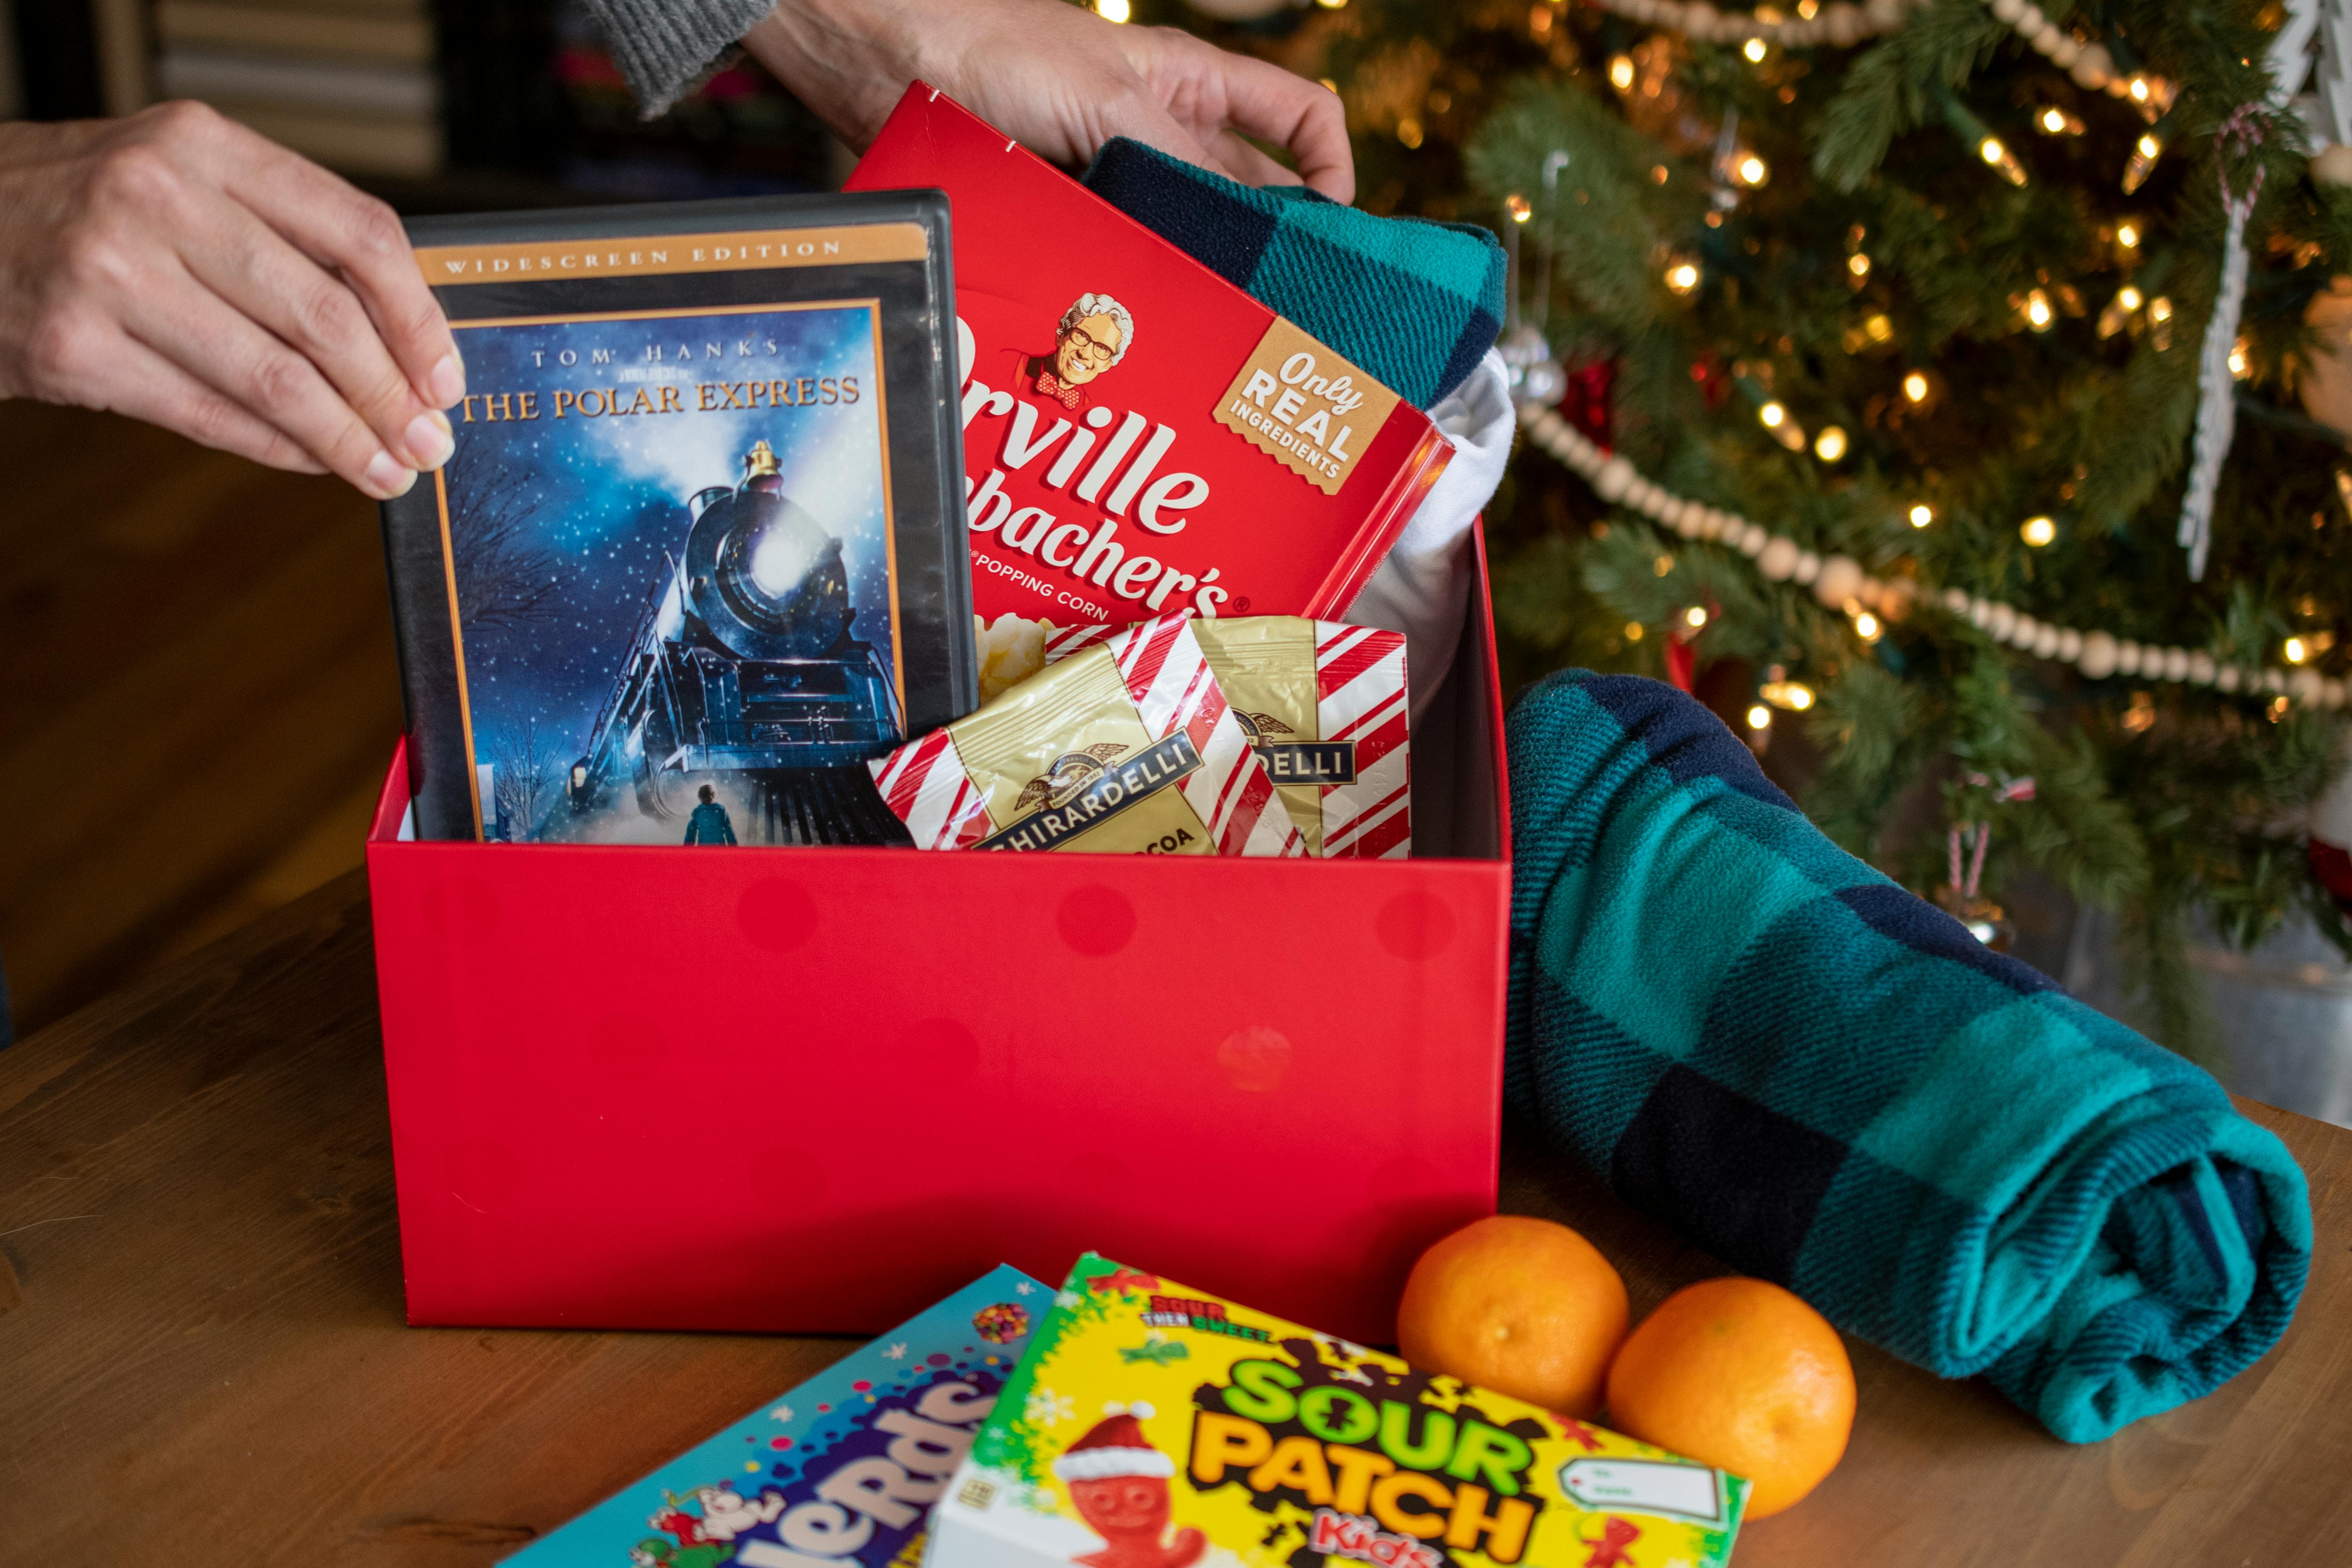 A red box filled with PJs, popcorn, candy, hot chocolate, and a movie.